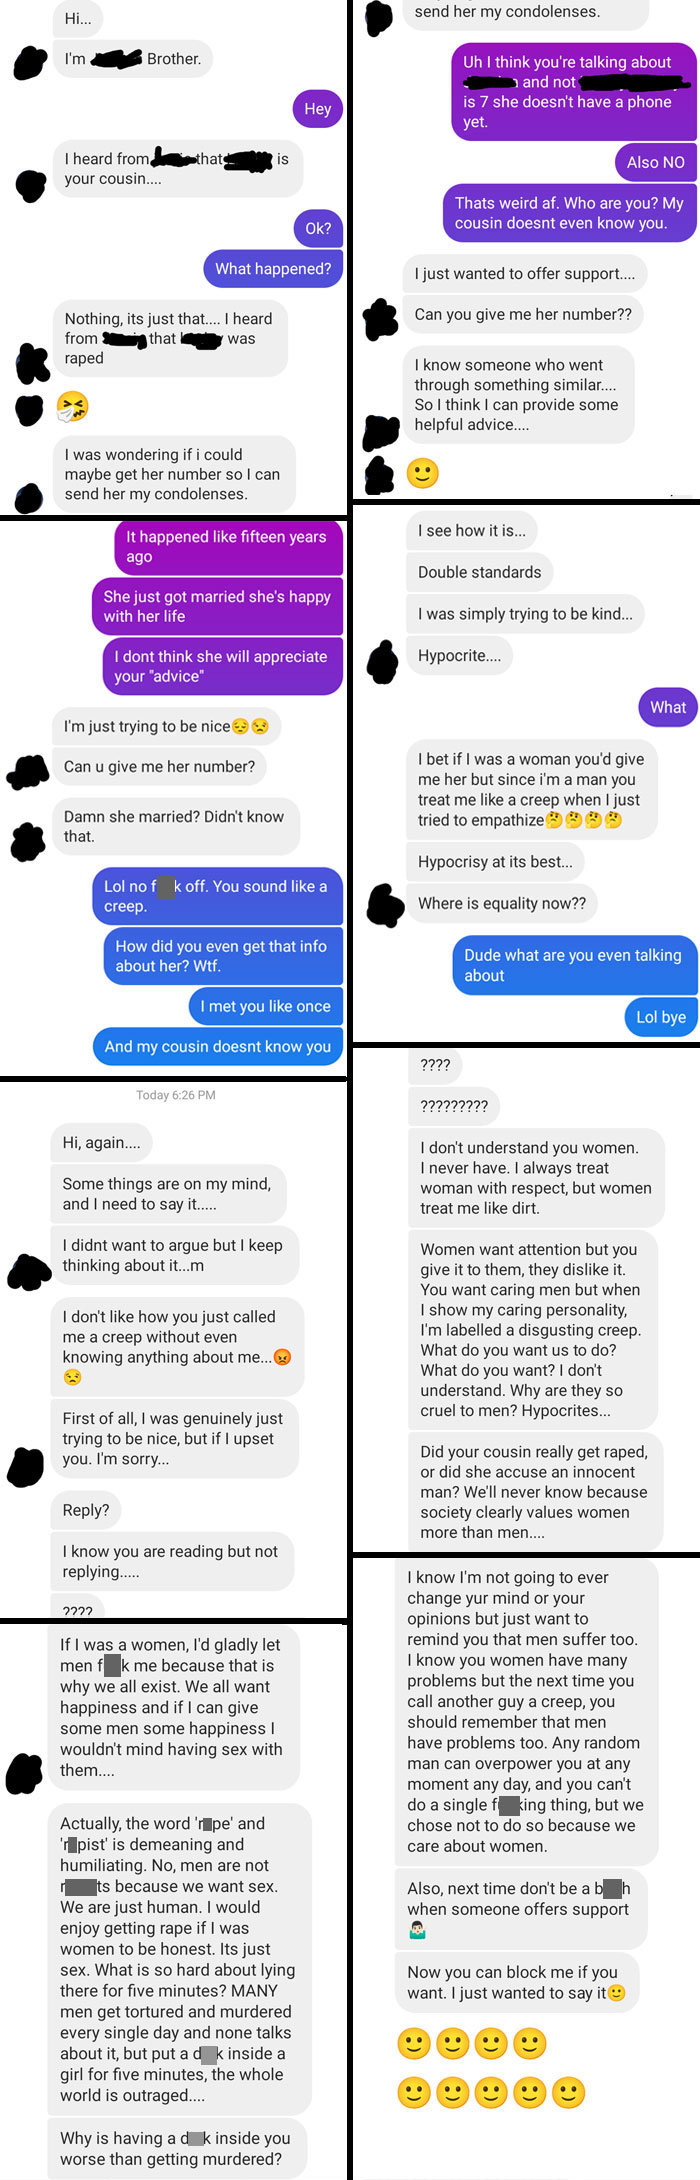 After A Nice Guy Found Out My Cousin Was A Sexual Assualt Survivor, He Tried To Get Her Number From Me So He Can Provide "Helpful Advice"